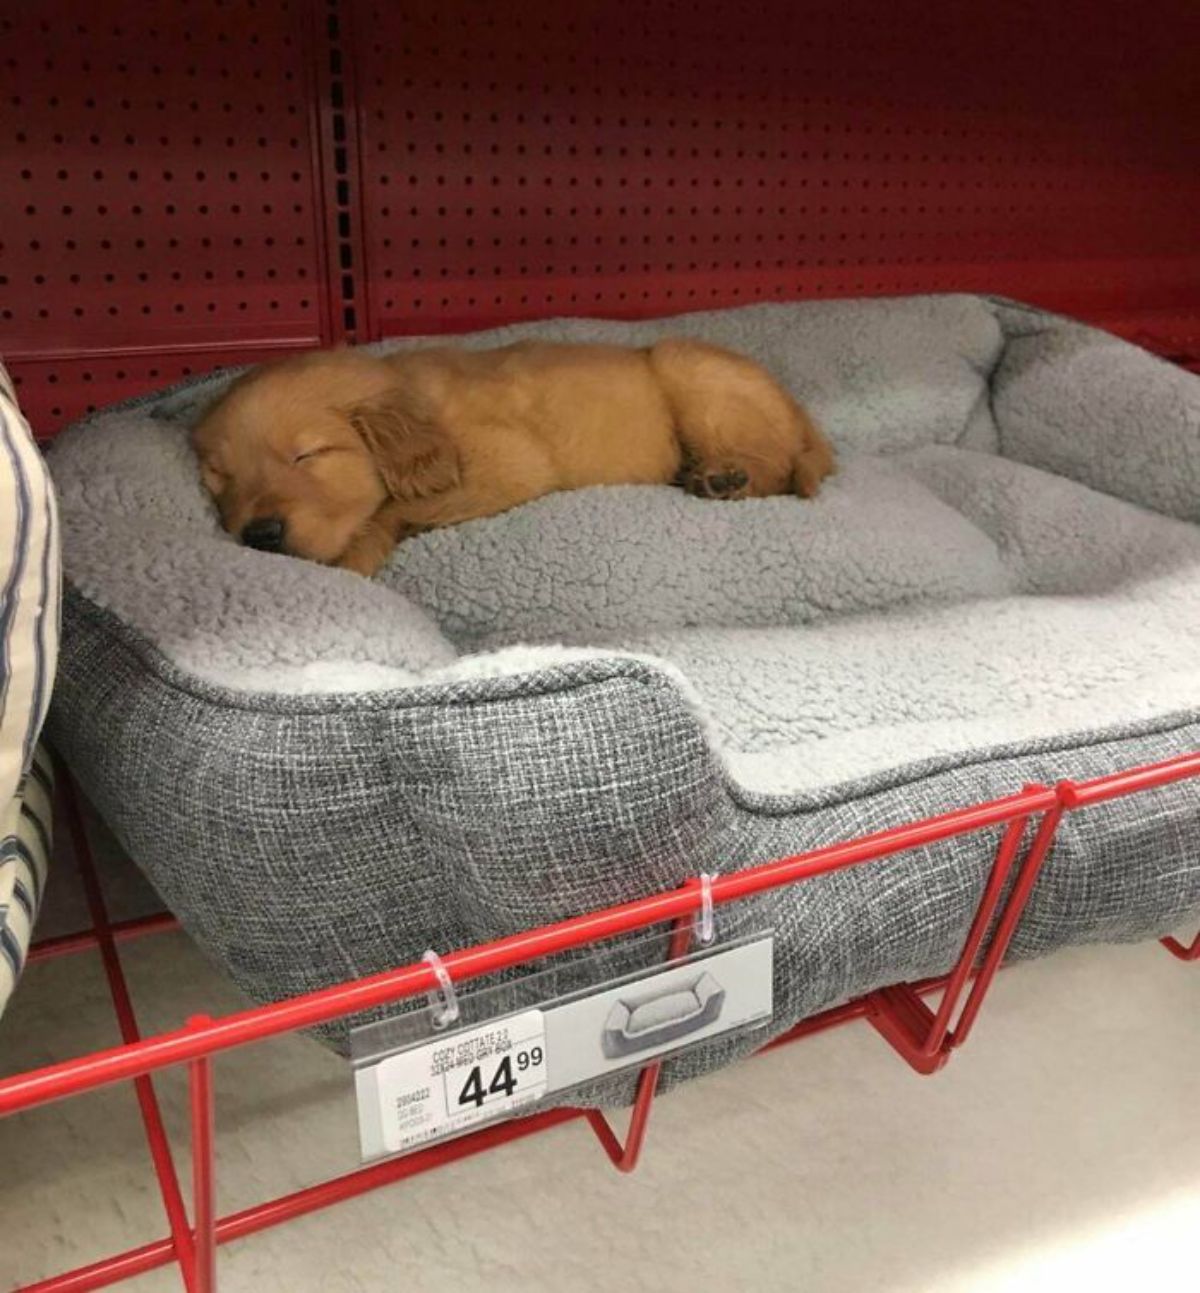 brown puppy sleeping on a grey dog bed at a store